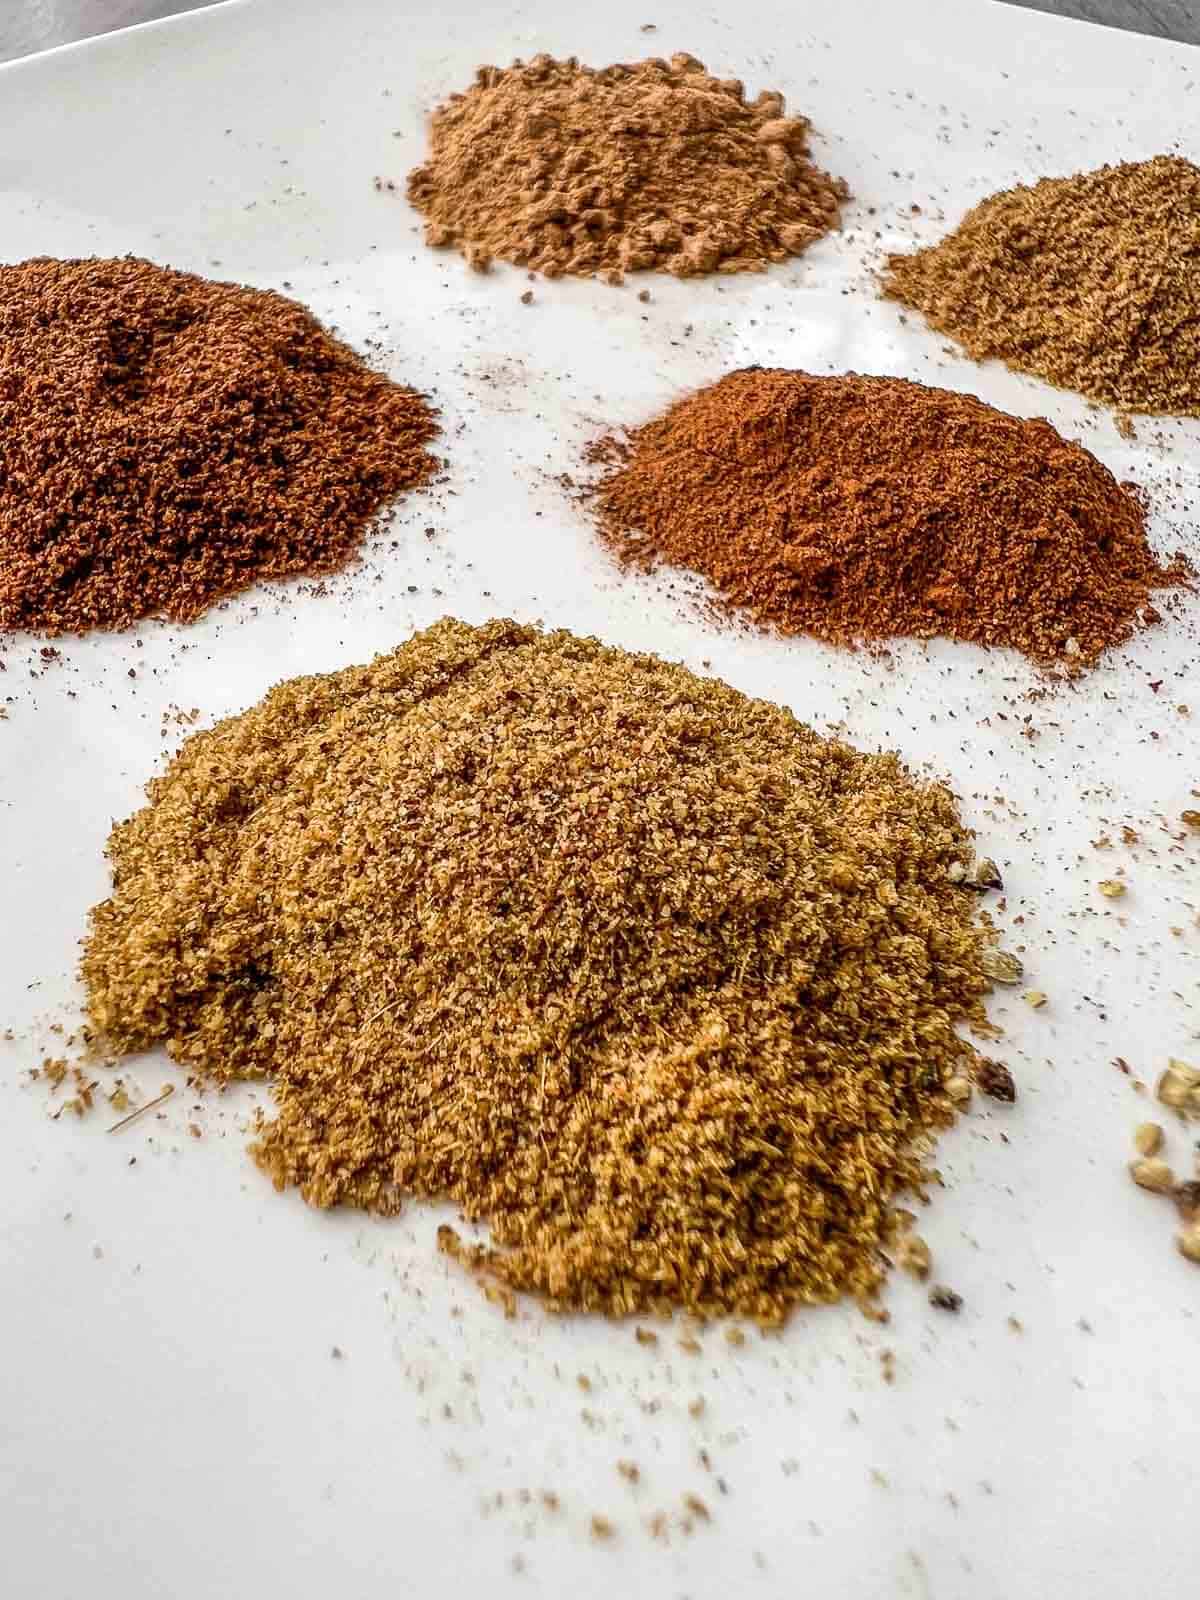 the five most common spices in the Lebanese spice mix.